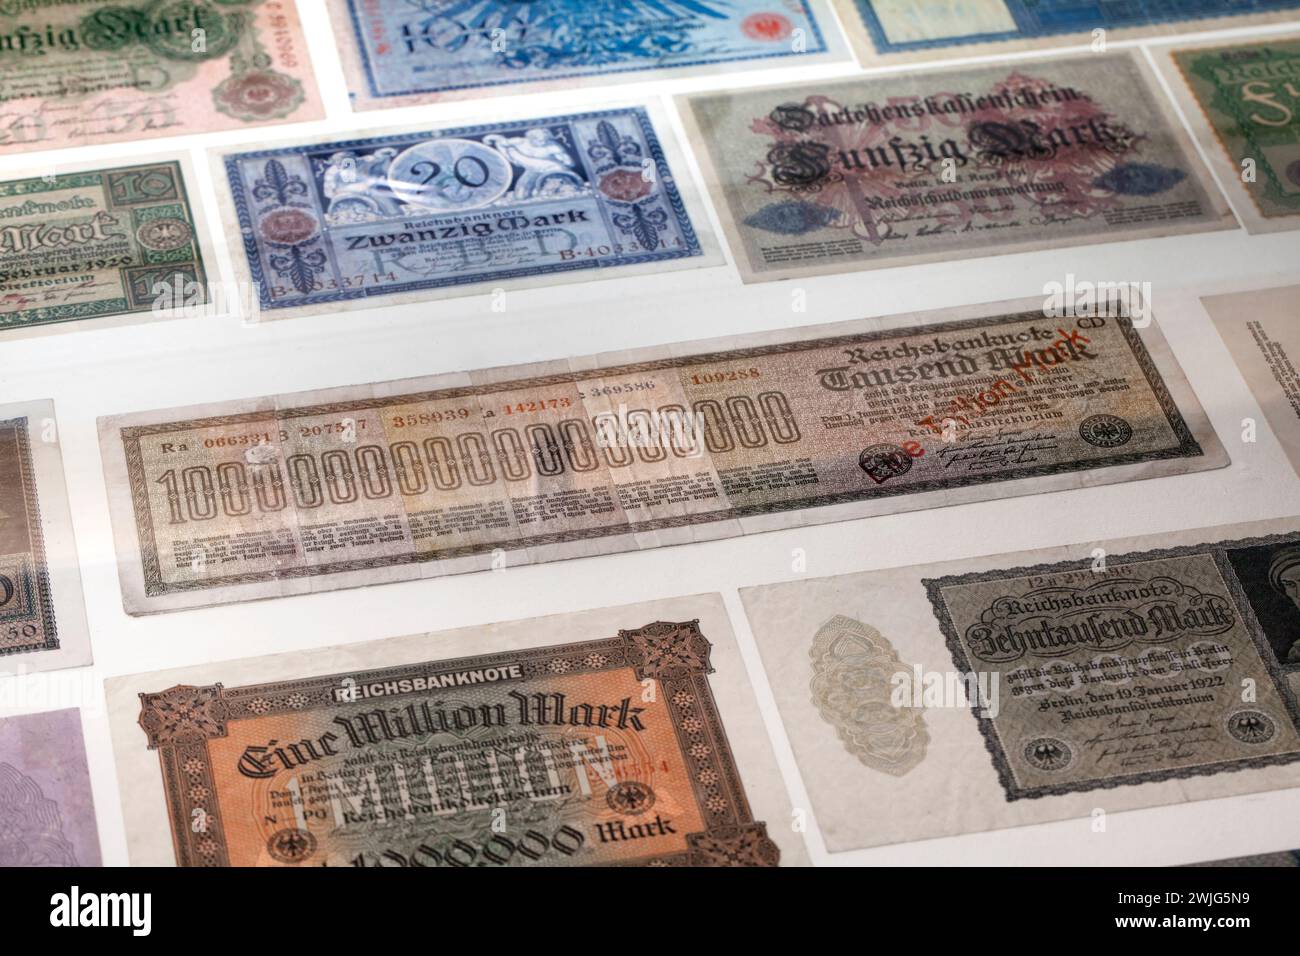 Historic  banknotes, GermanHyperinflation Papiermark, Germany, 1920s, Europe Stock Photo